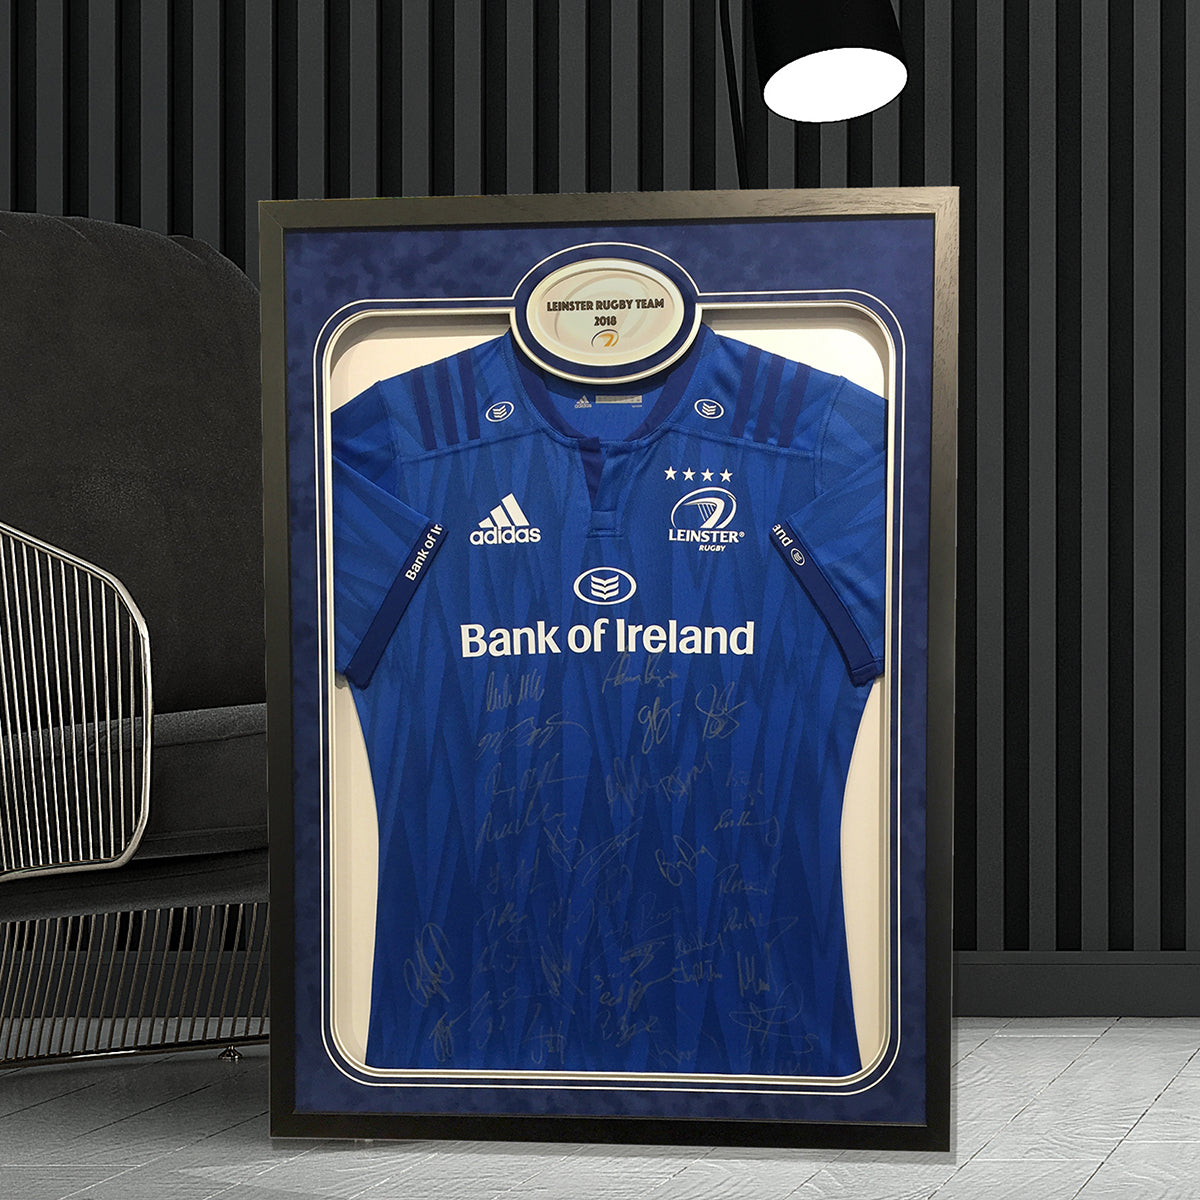 Leinster signed Rugby Jersey Frame - with neckline graphic